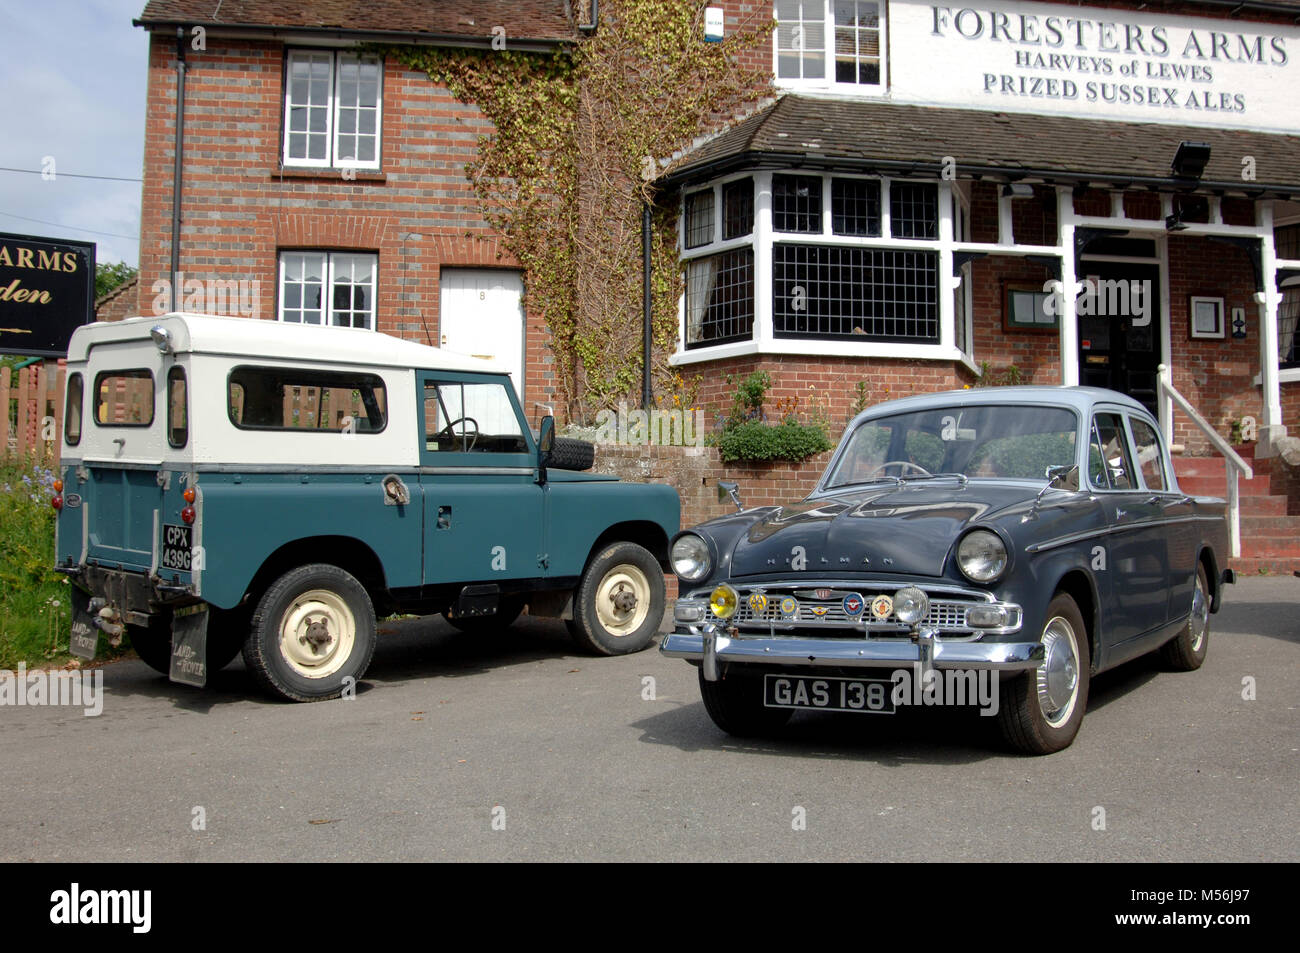 1961 Hillman Minx and Land Rover Series IIA classic British cars outside a country pub Stock Photo